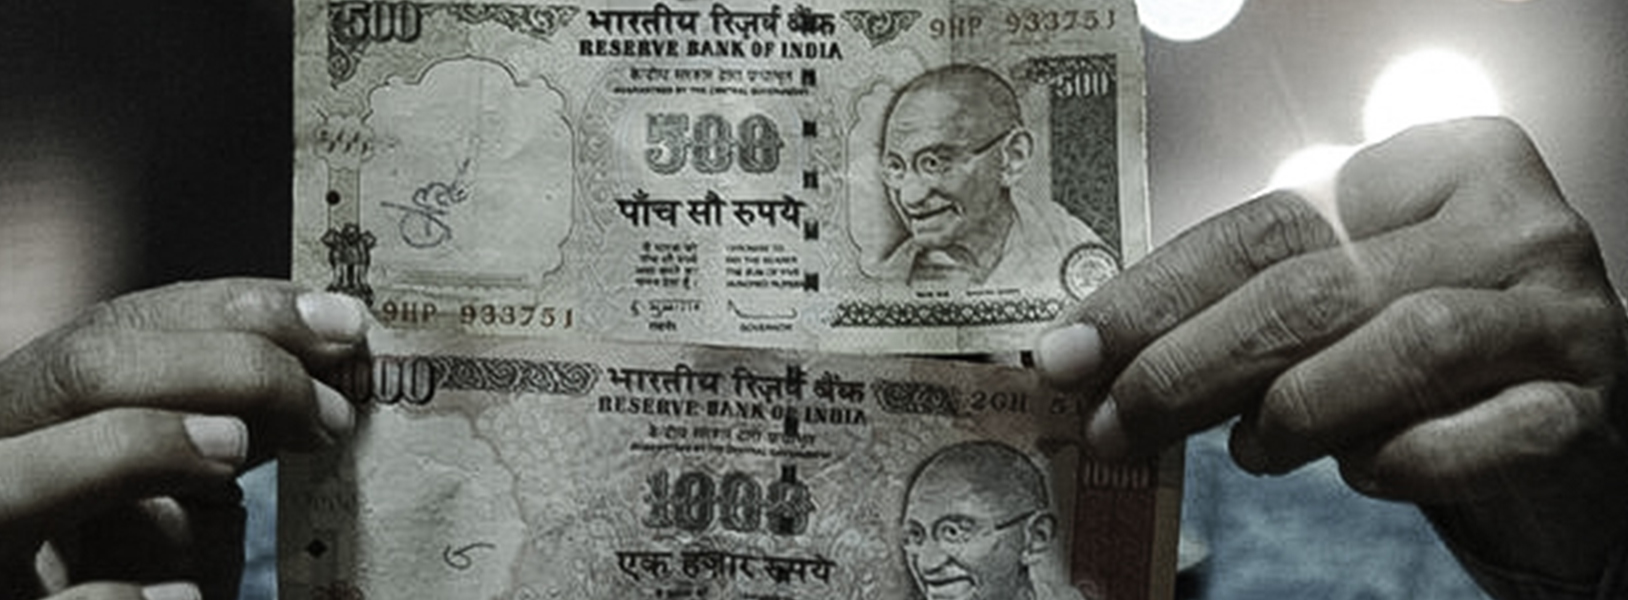 article on demonetization in india